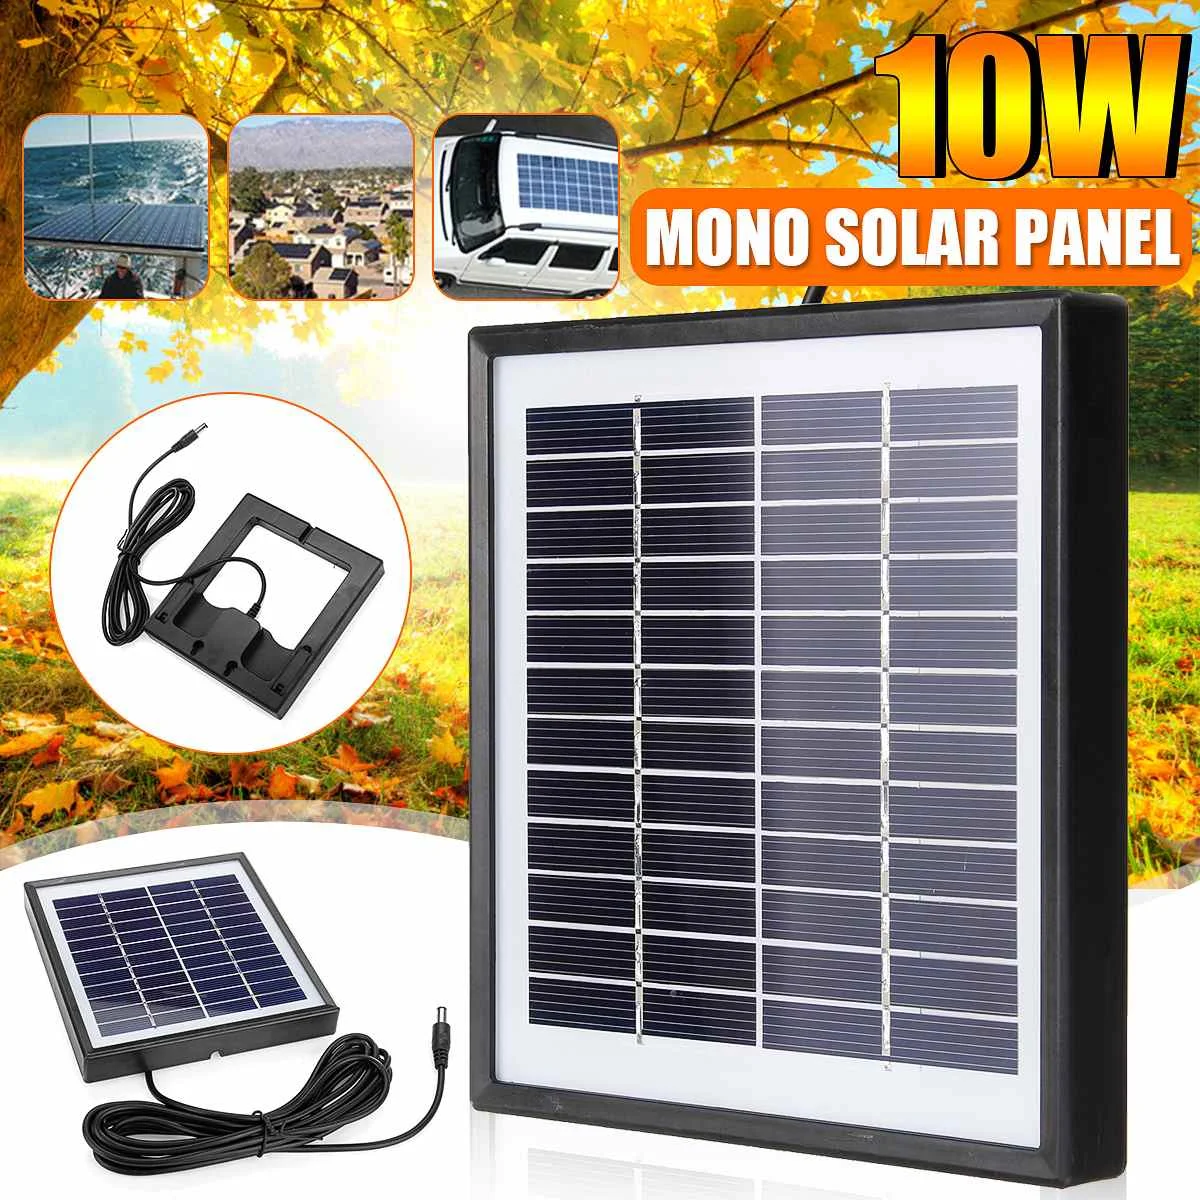 12V 10W 220MA Mini Portable Polycrystalline Solar Panel with Plastic x DC Interface Cable For Car Moblie Phone Battery Charger